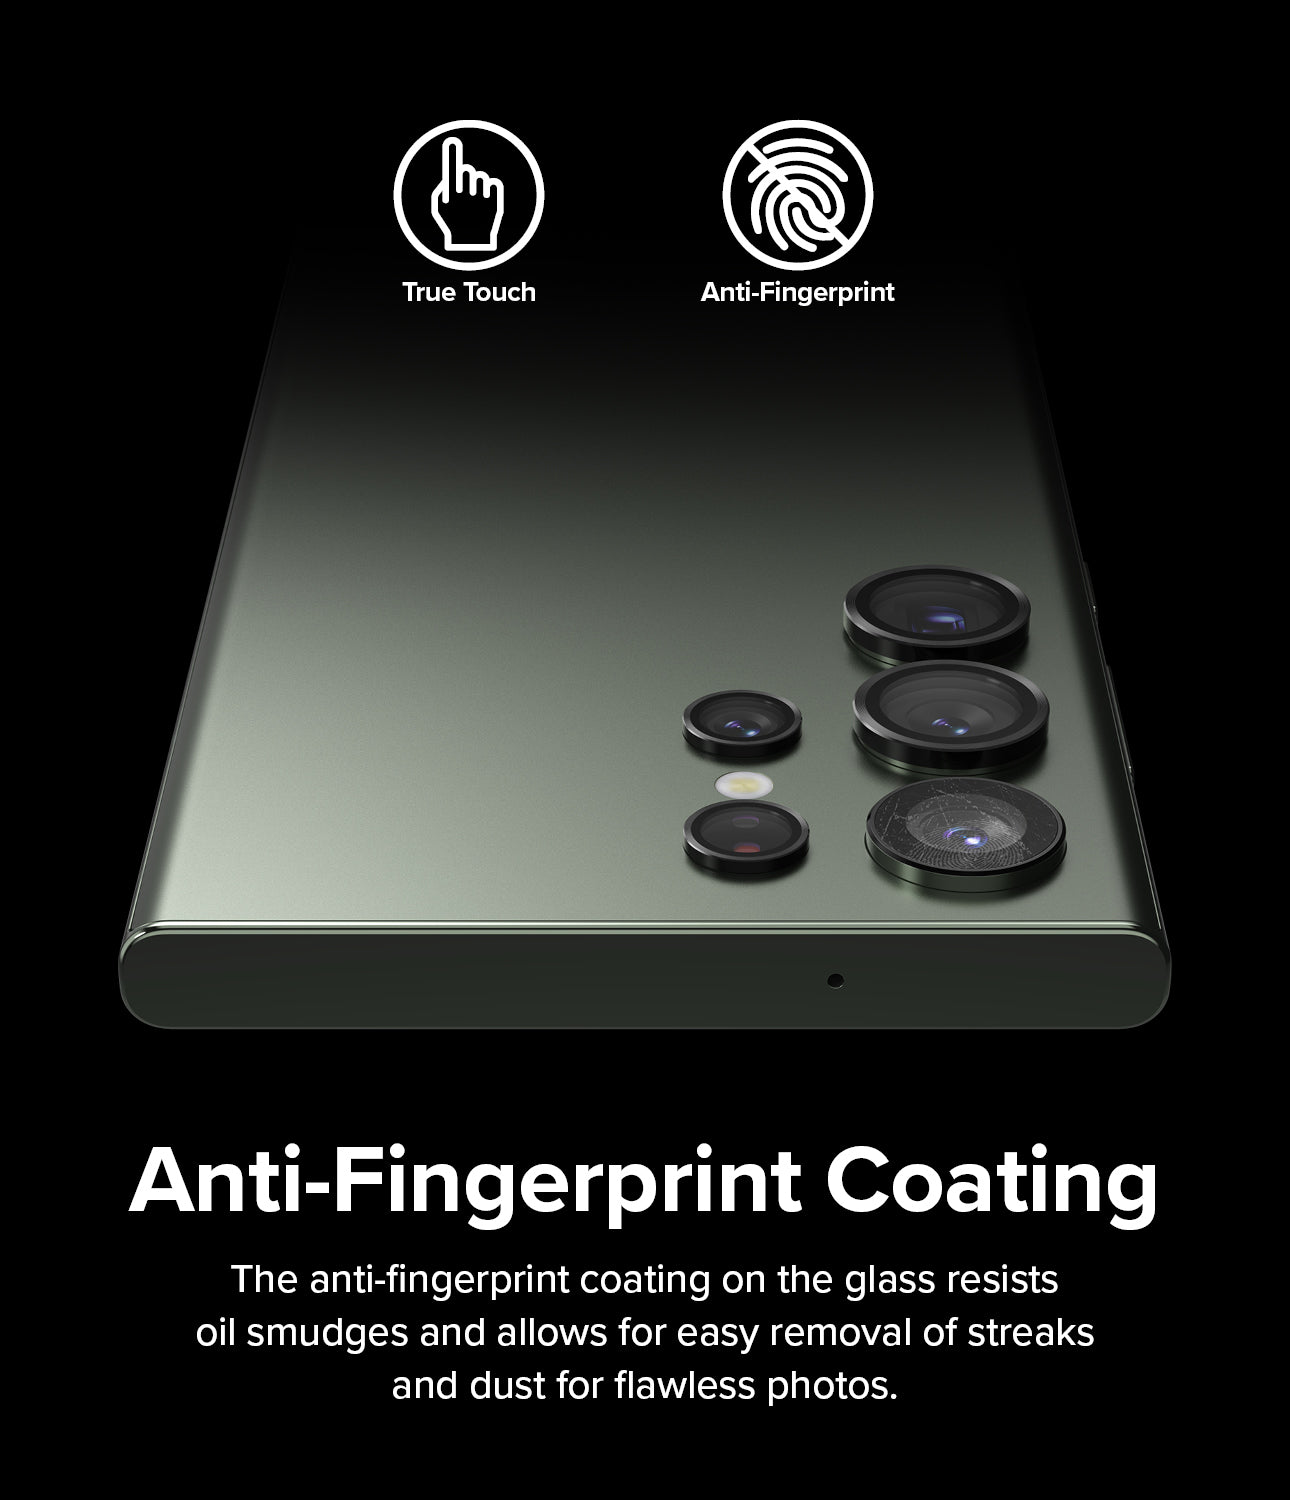 Anti-Fingerprint Coating l The anti-fingerprint coating on the glass resists oil smidges and allows for easy removal of streaks and dust for flawless photos.